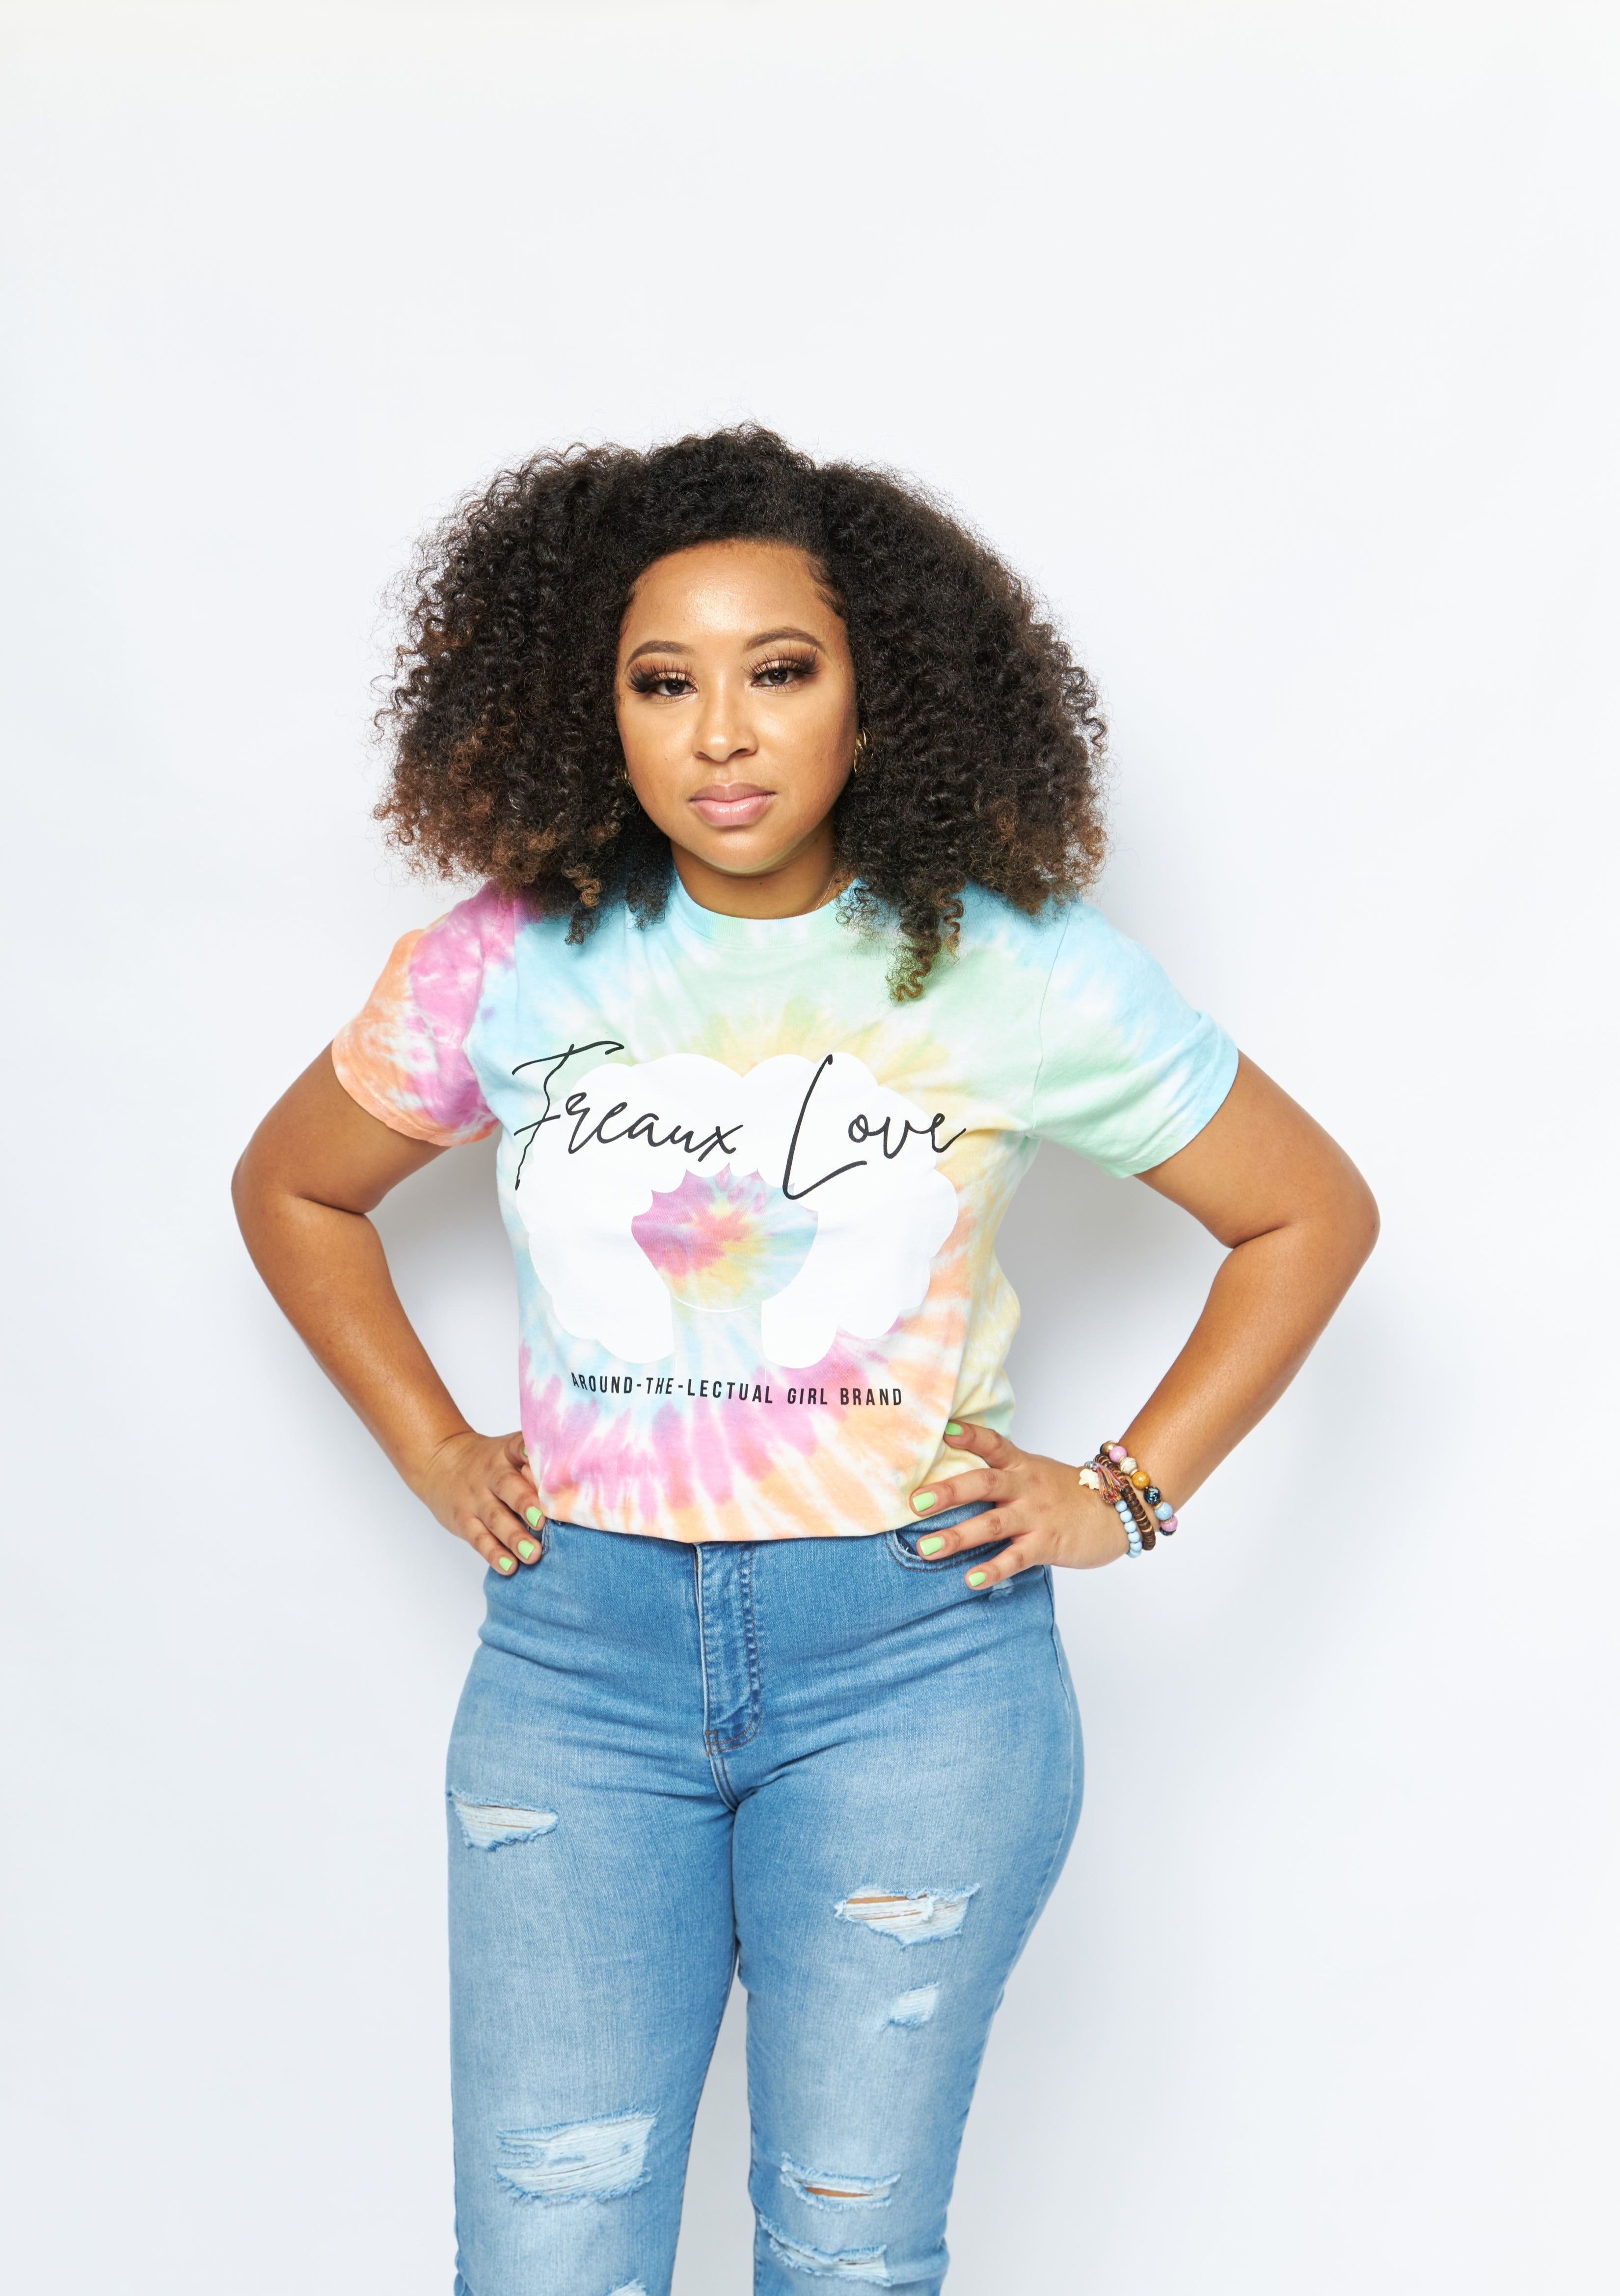 Quotable Freaux Love Tee – Around-the-Lectual Girl Brand